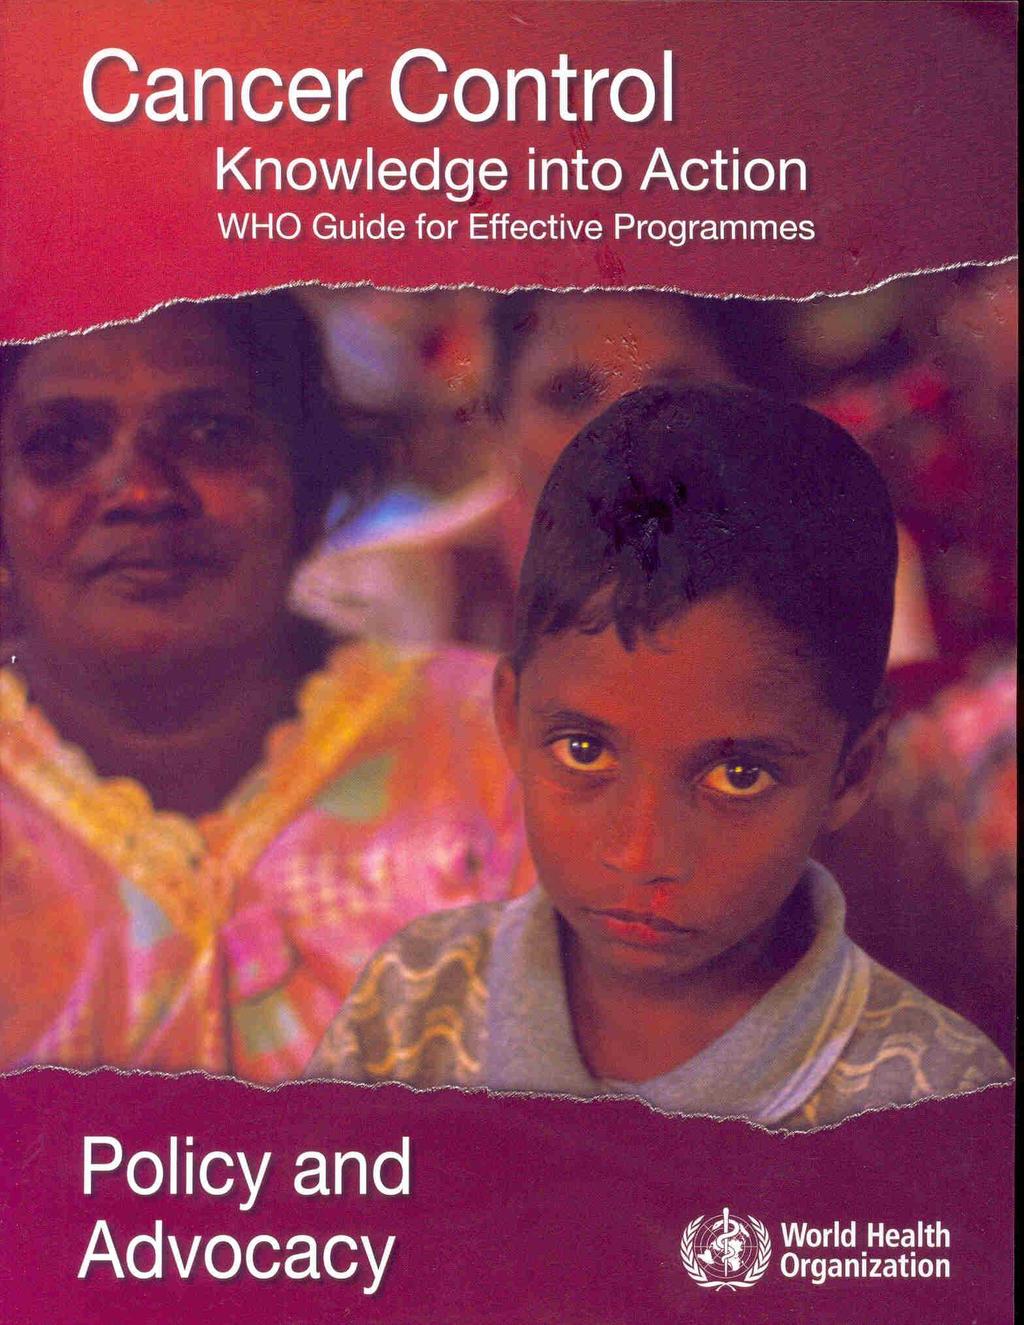 control knowledge into action WHO guide for effective programmes: Policy and advocacy: module, 6. WHO. 2008. 48p.